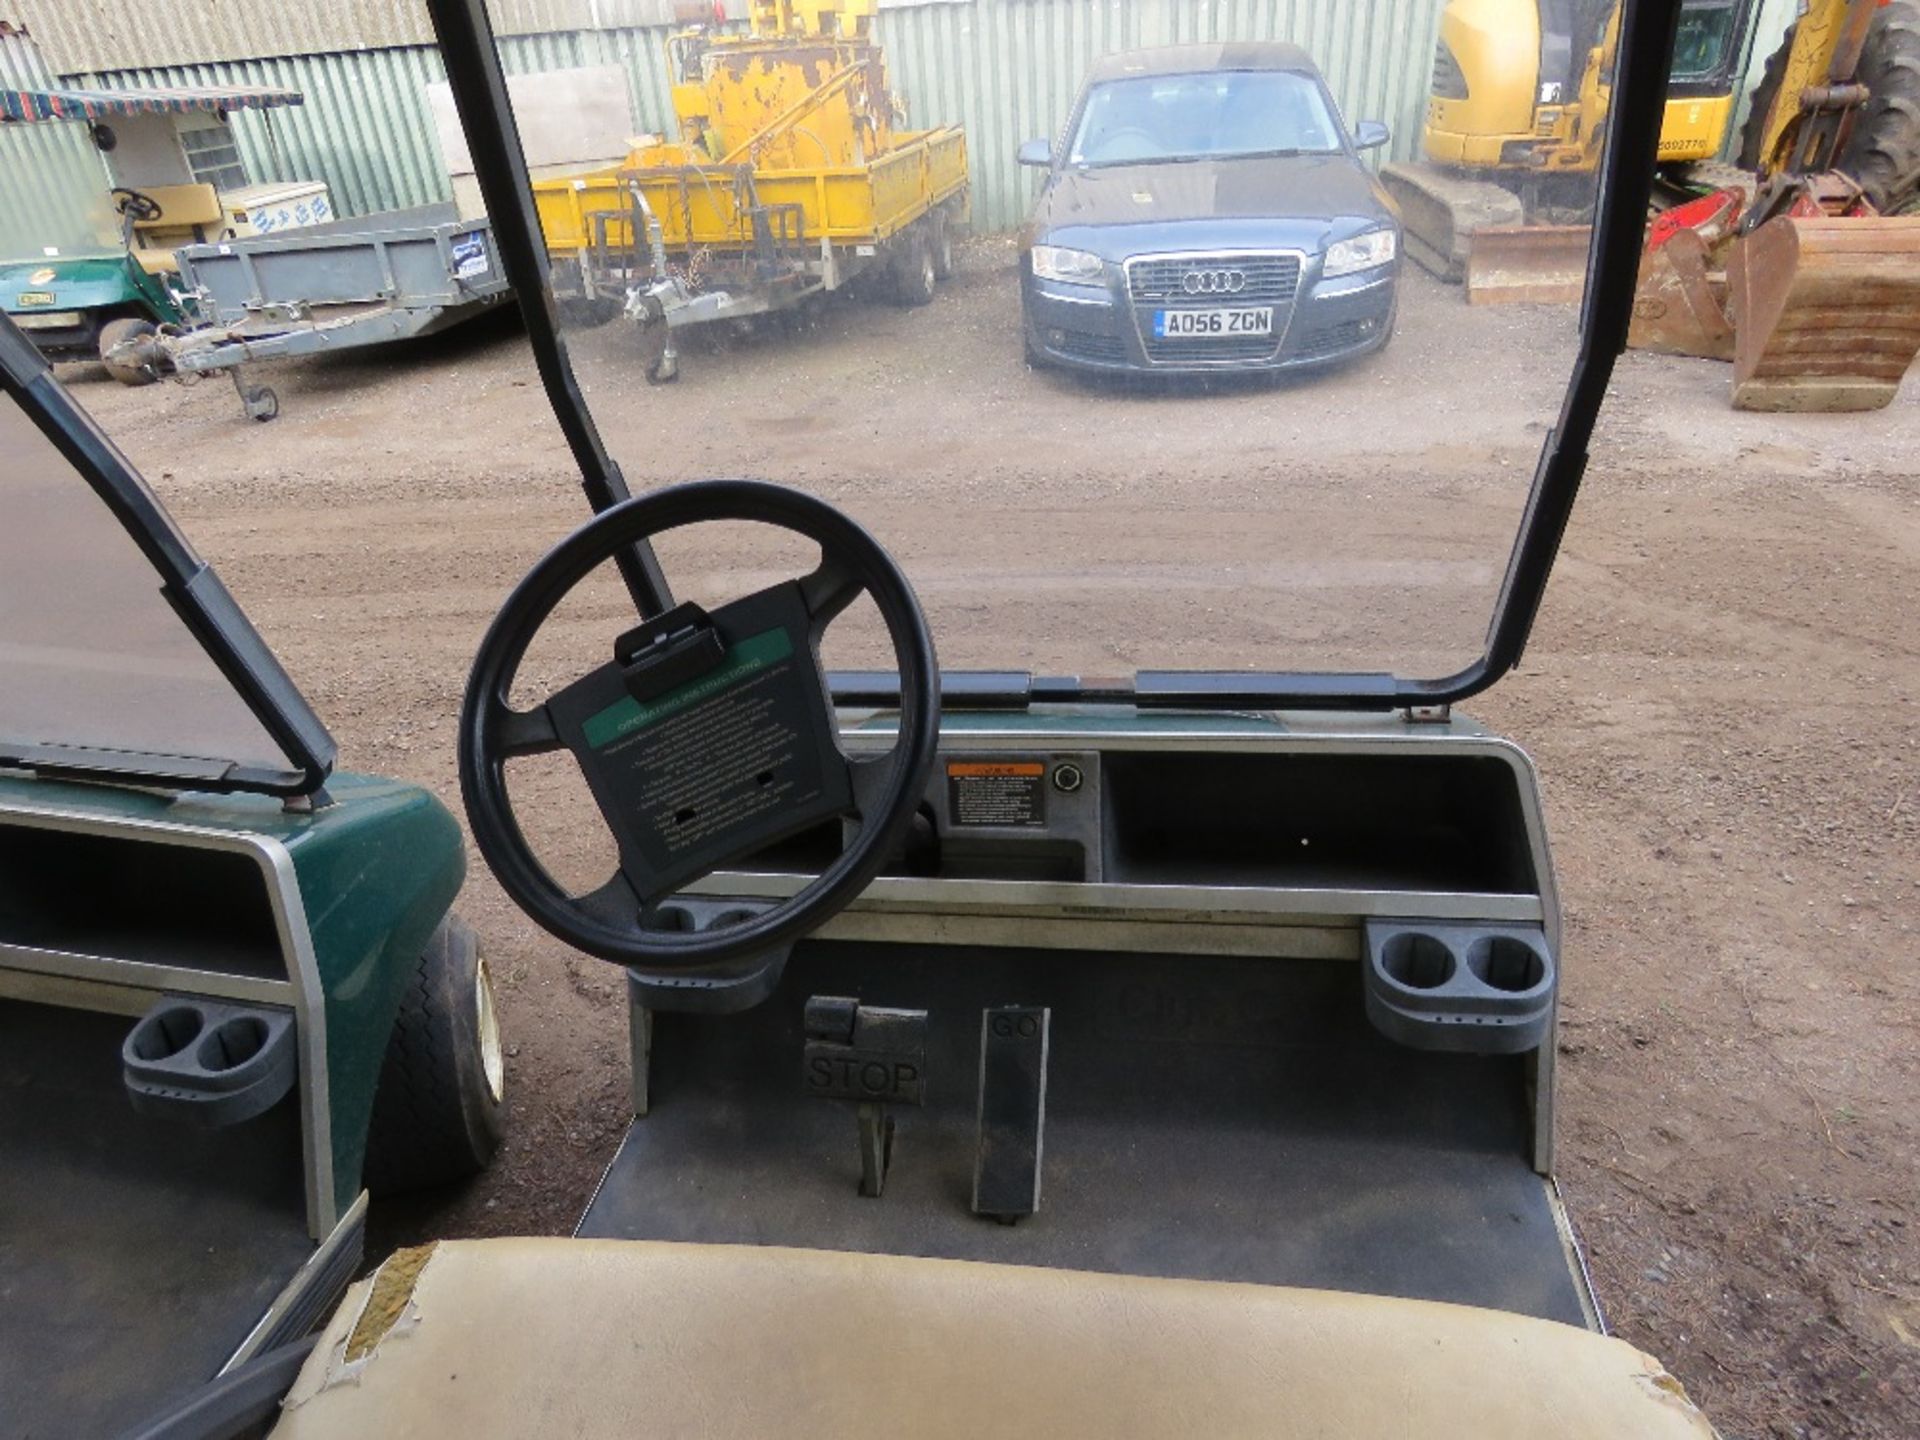 CLUBCAR PETROL ENGINED GOLF CART. BEEN STORED FOR SOME TIME, UNTESTED. - Image 6 of 9